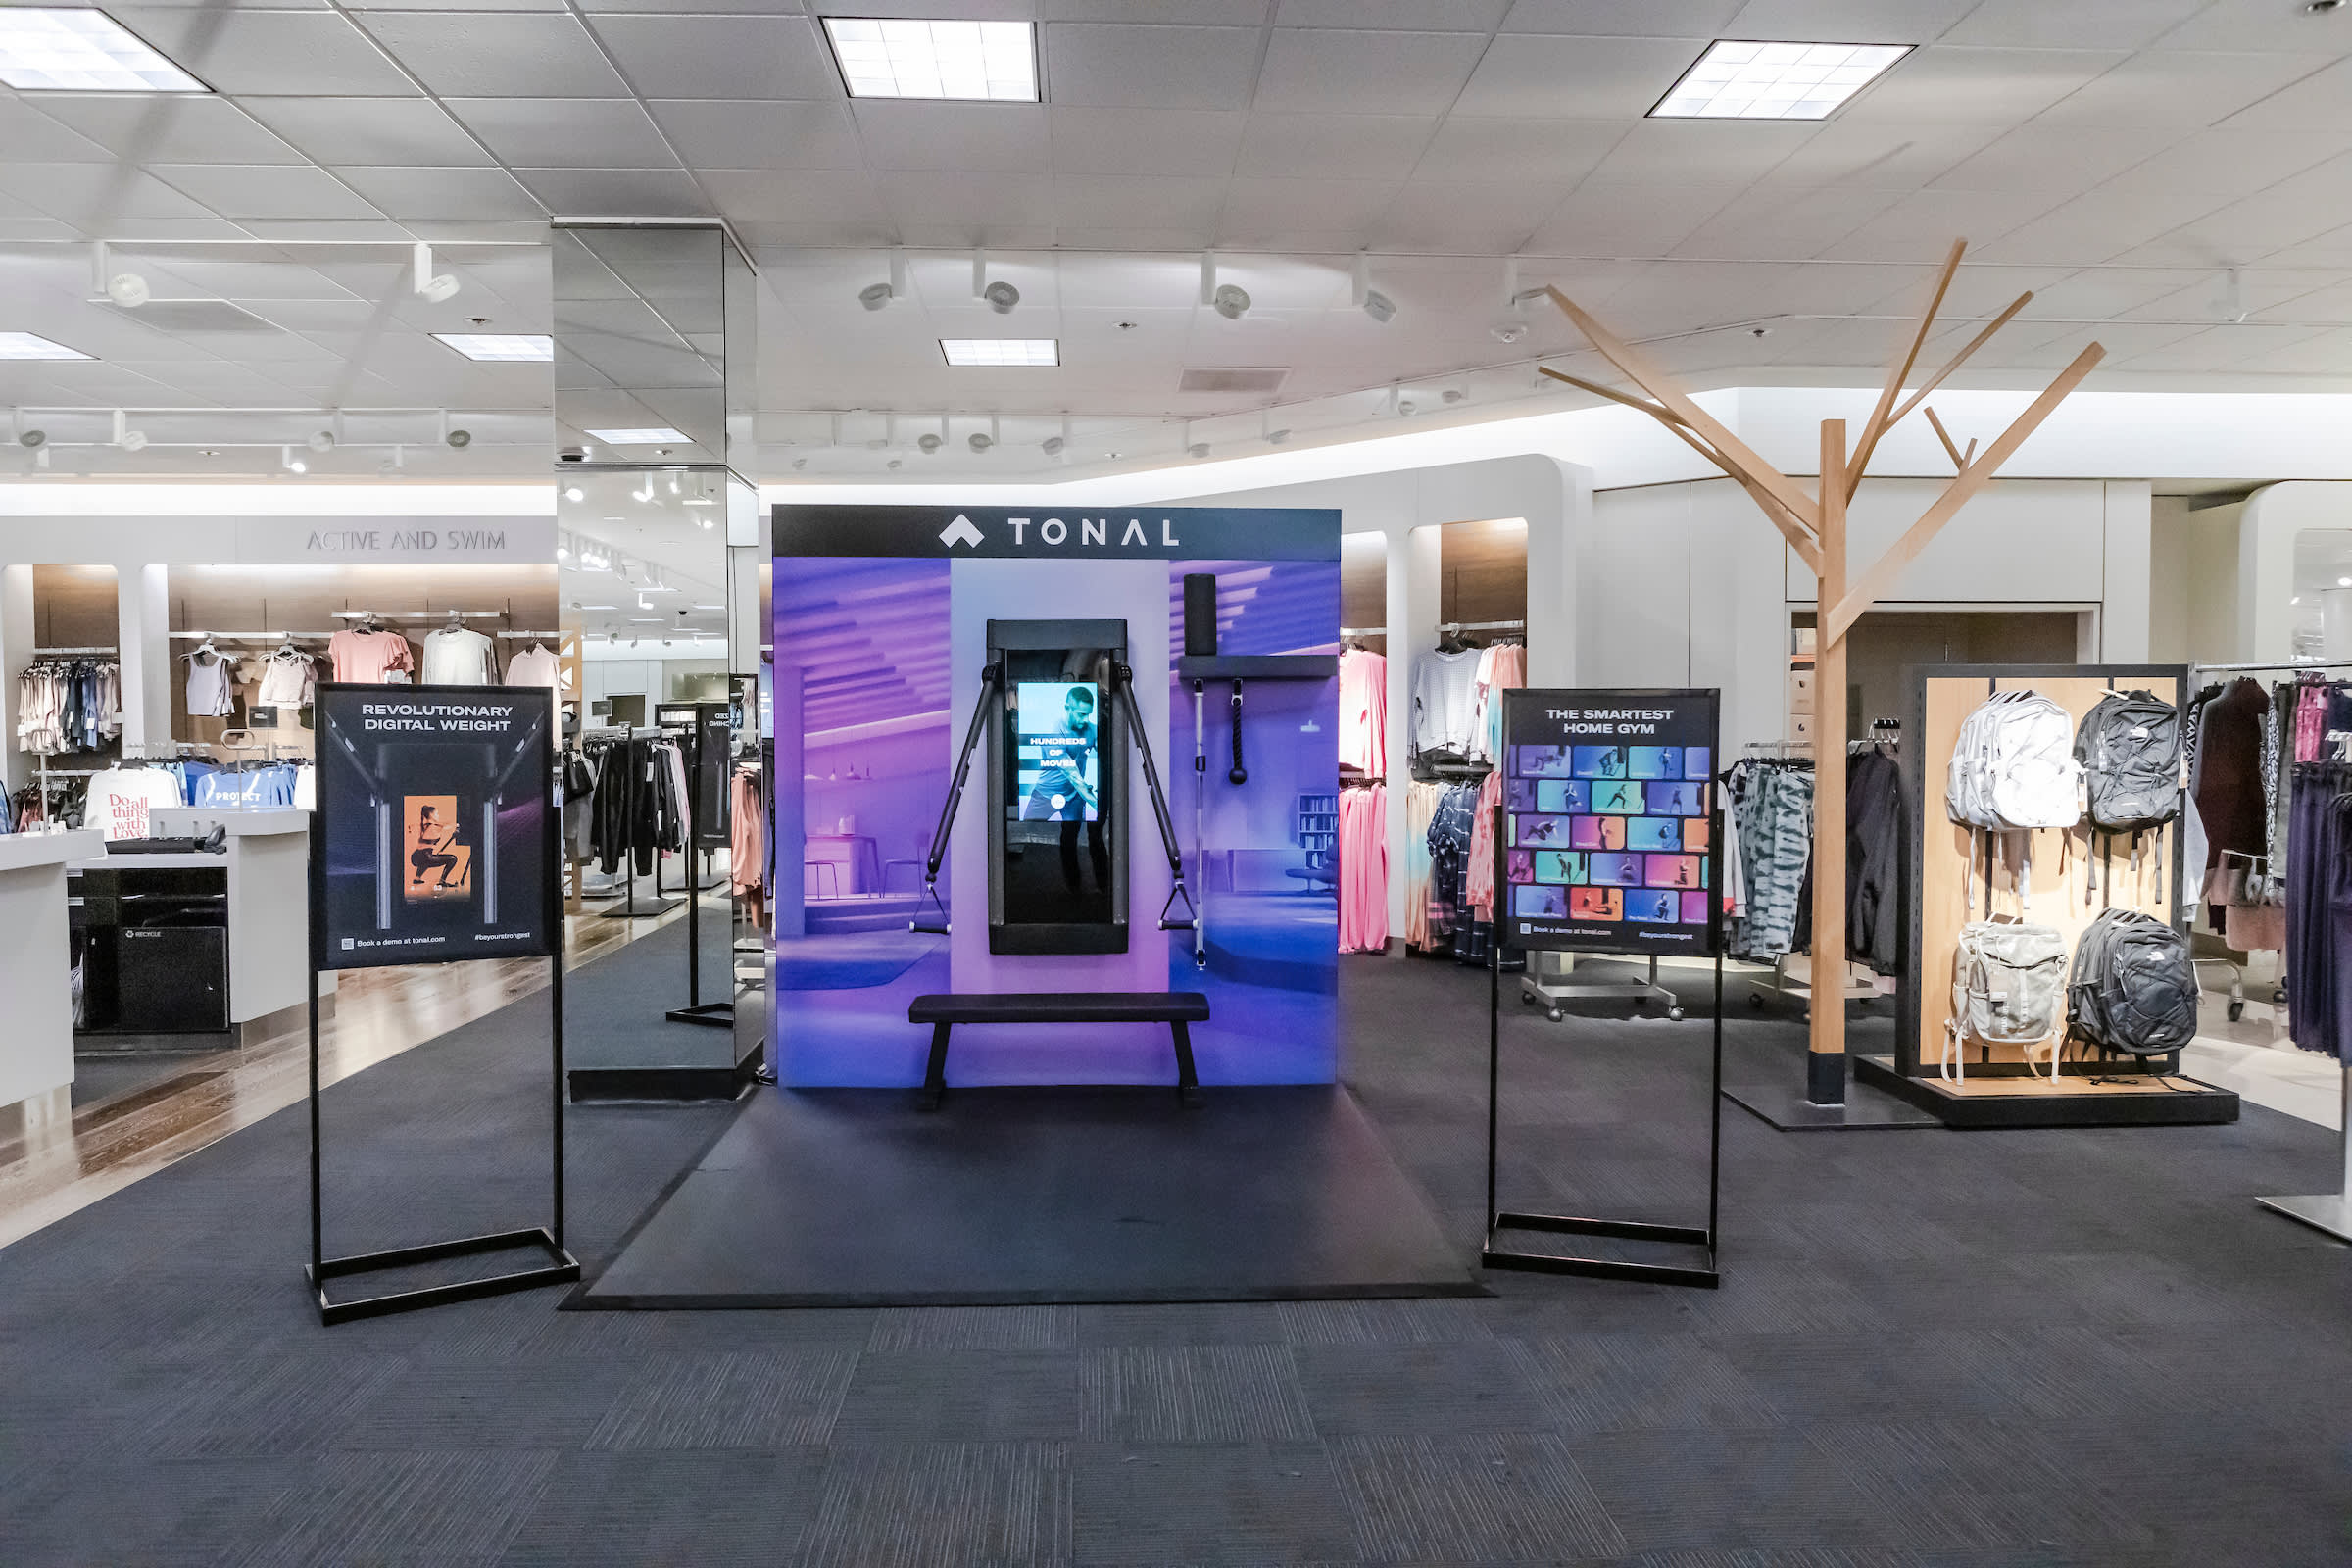 Nordstrom adds Tonal stores in 40 stores to promote fitness offers